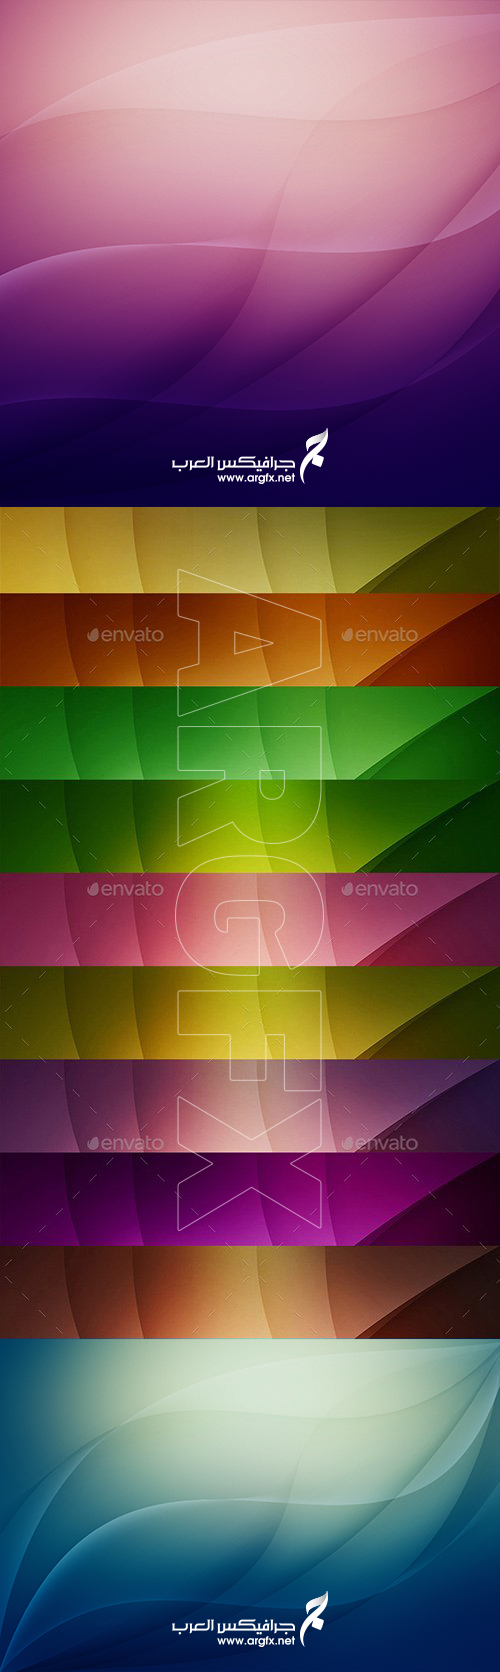  Graphicriver Abstract Waves Backgrounds 17375510